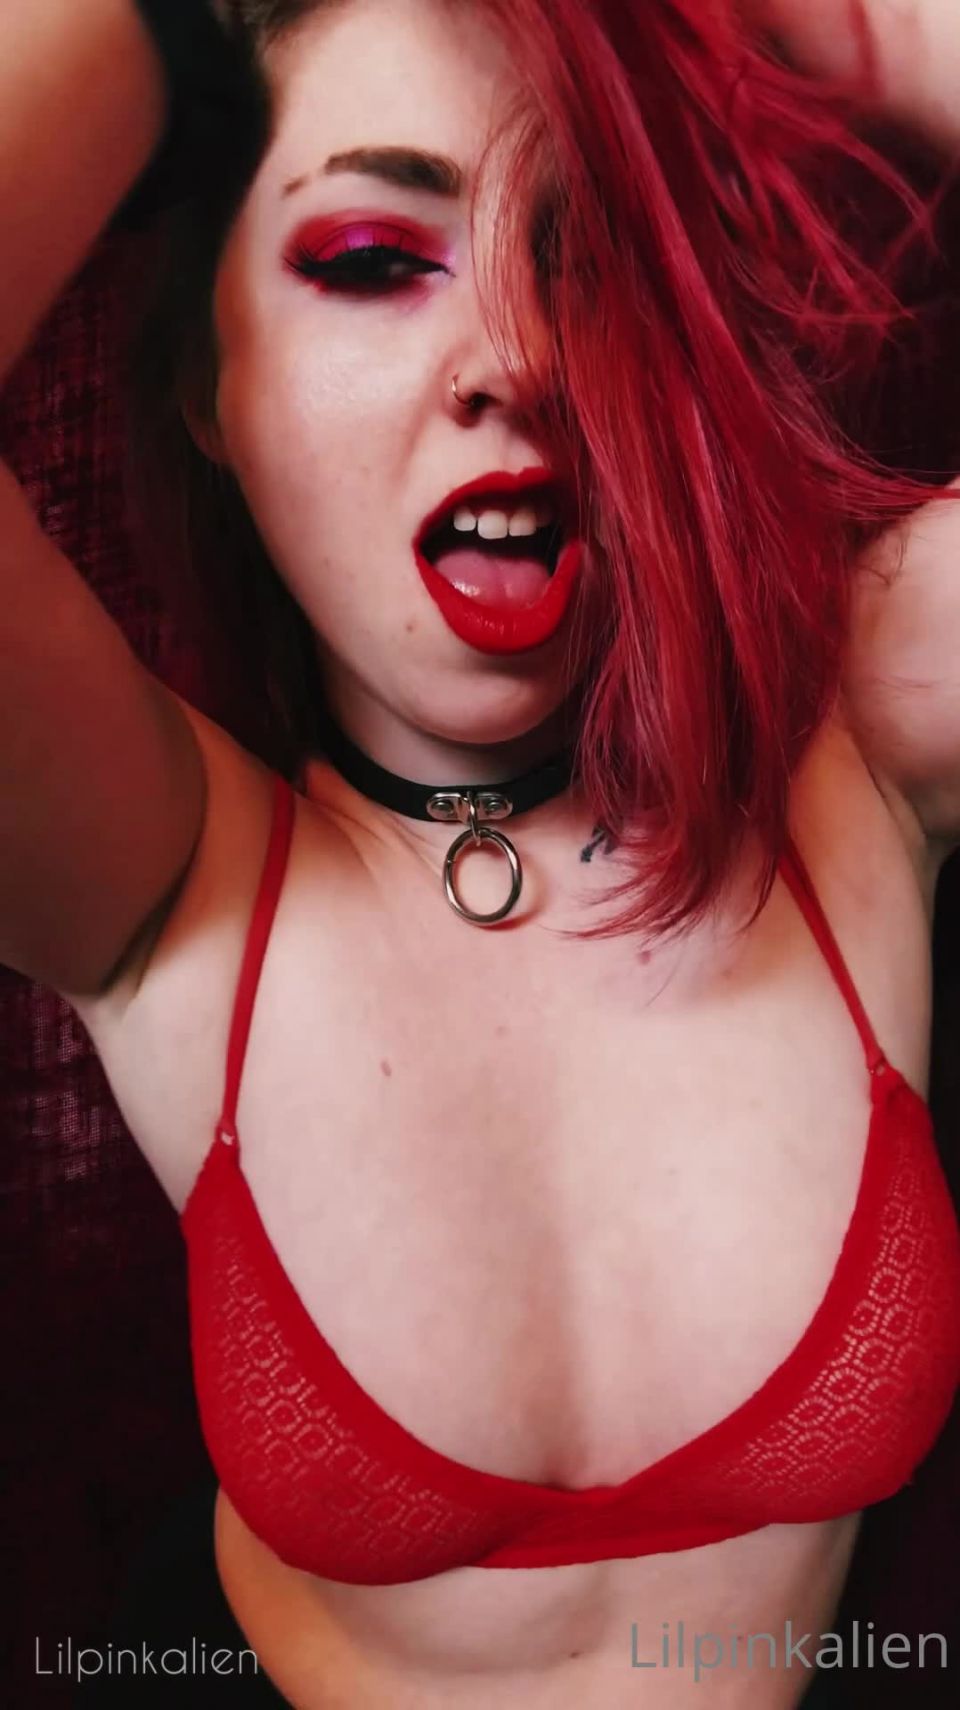 Onlyfans - Lilpinkalien - Its kinda stupid how long I took trying to make the transitions smooth lol I think I o - 08-03-2021